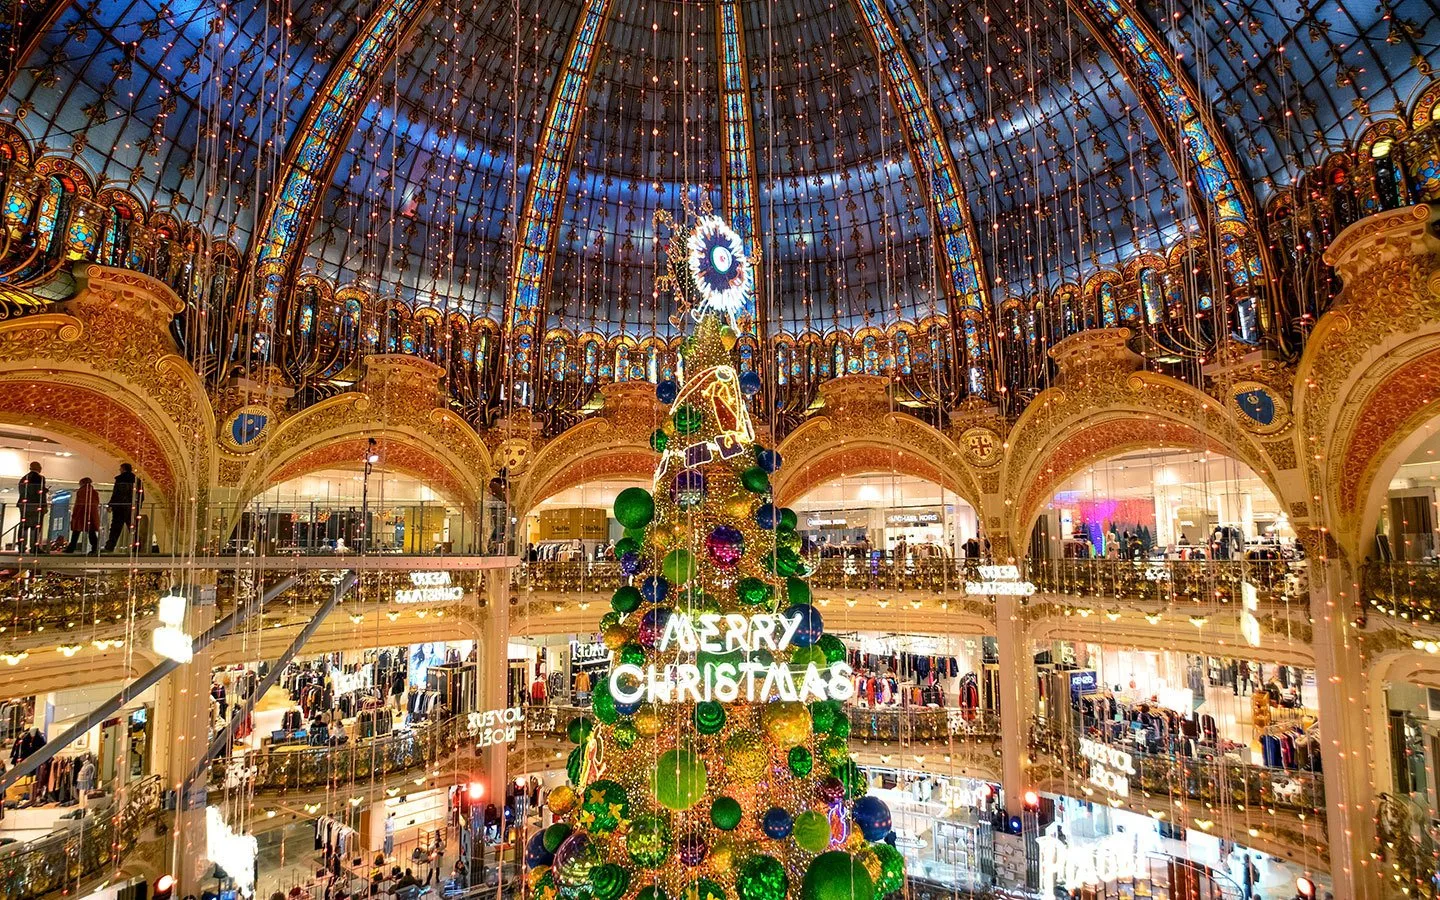 Paris in winter: 9 things to do in Paris at Christmas